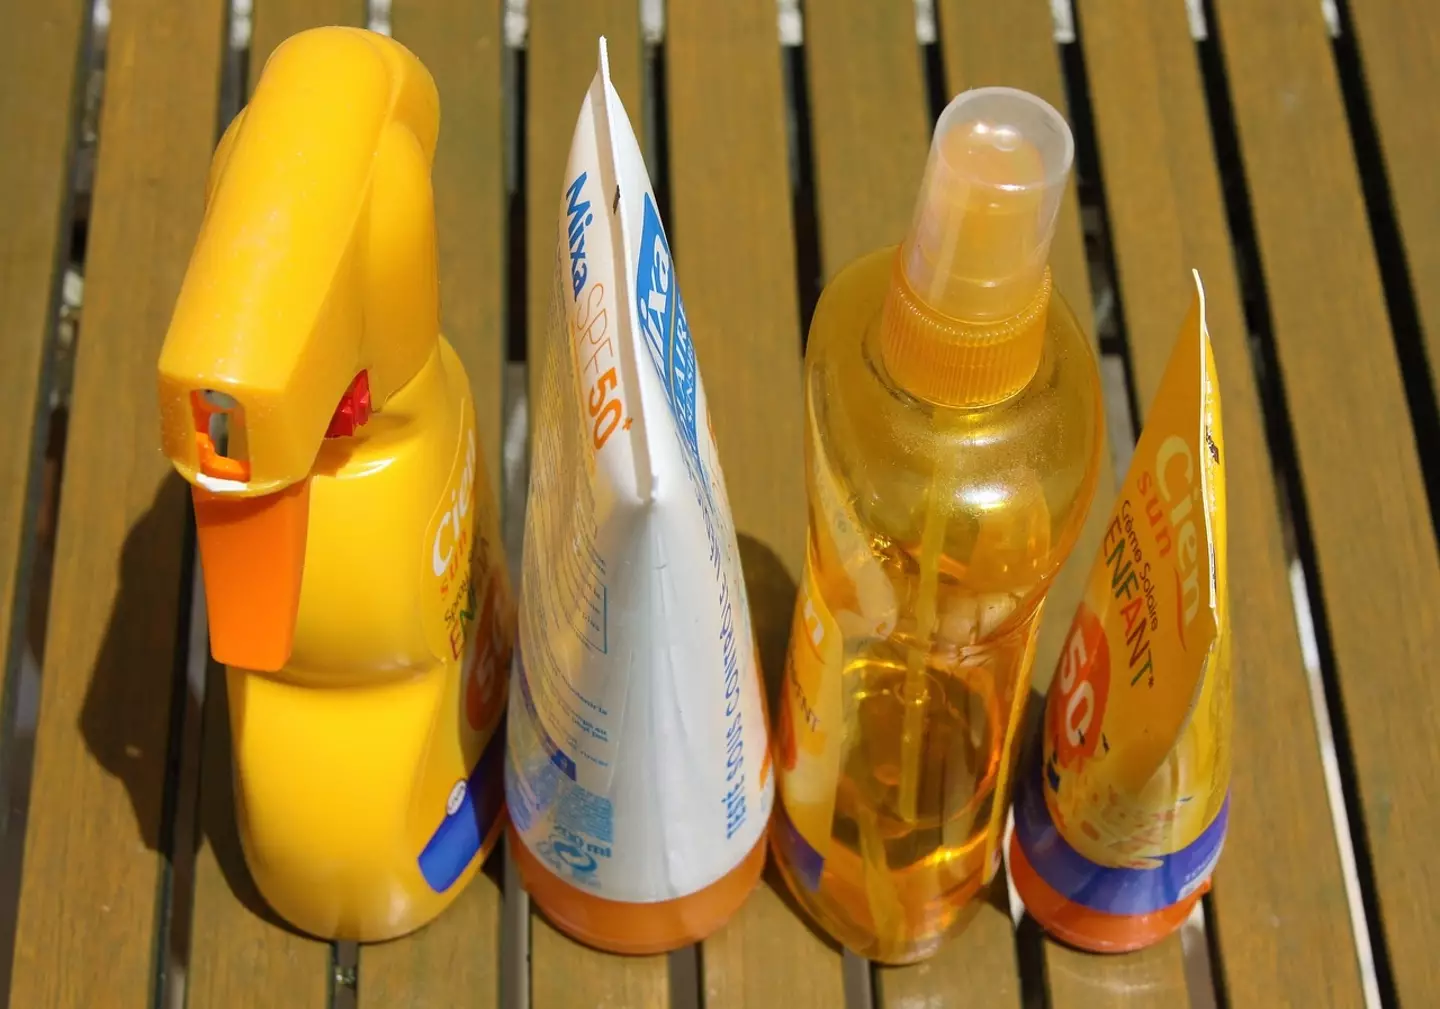 Suncream also helps reduce the signs of ageing.